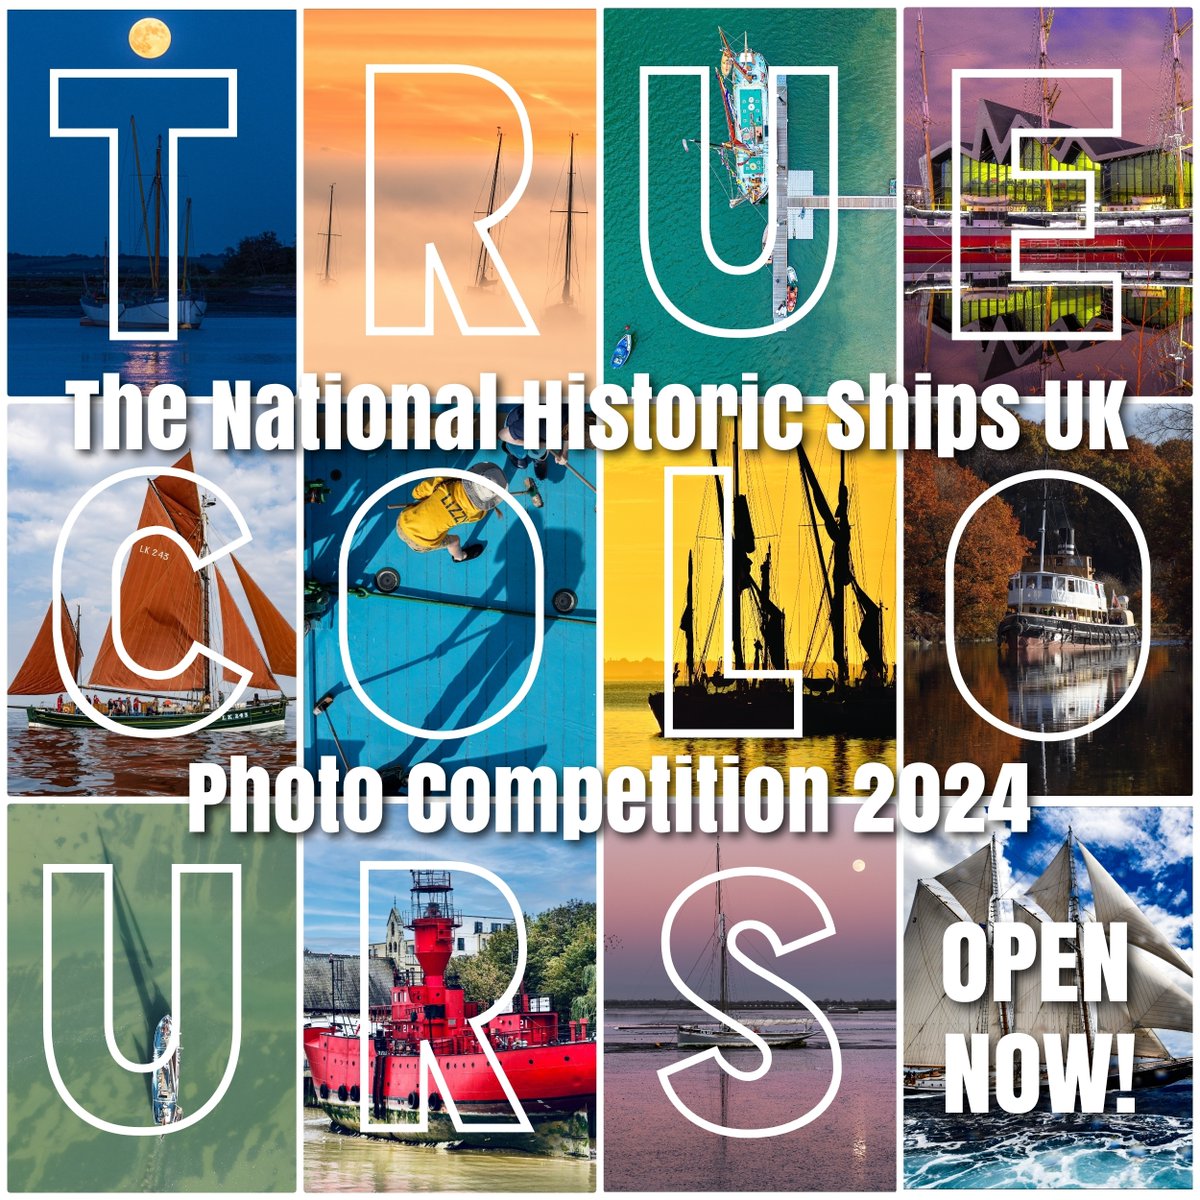 📢 The 2024 @NatHistShips Photo Competition is now OPEN! This year's theme is 'True Colours' and there are some fantastic prizes to be won, as well as the chance to be featured in our 2025 calendar and an accompanying exhibition. Read more & enter: nationalhistoricships.org.uk/photocomp